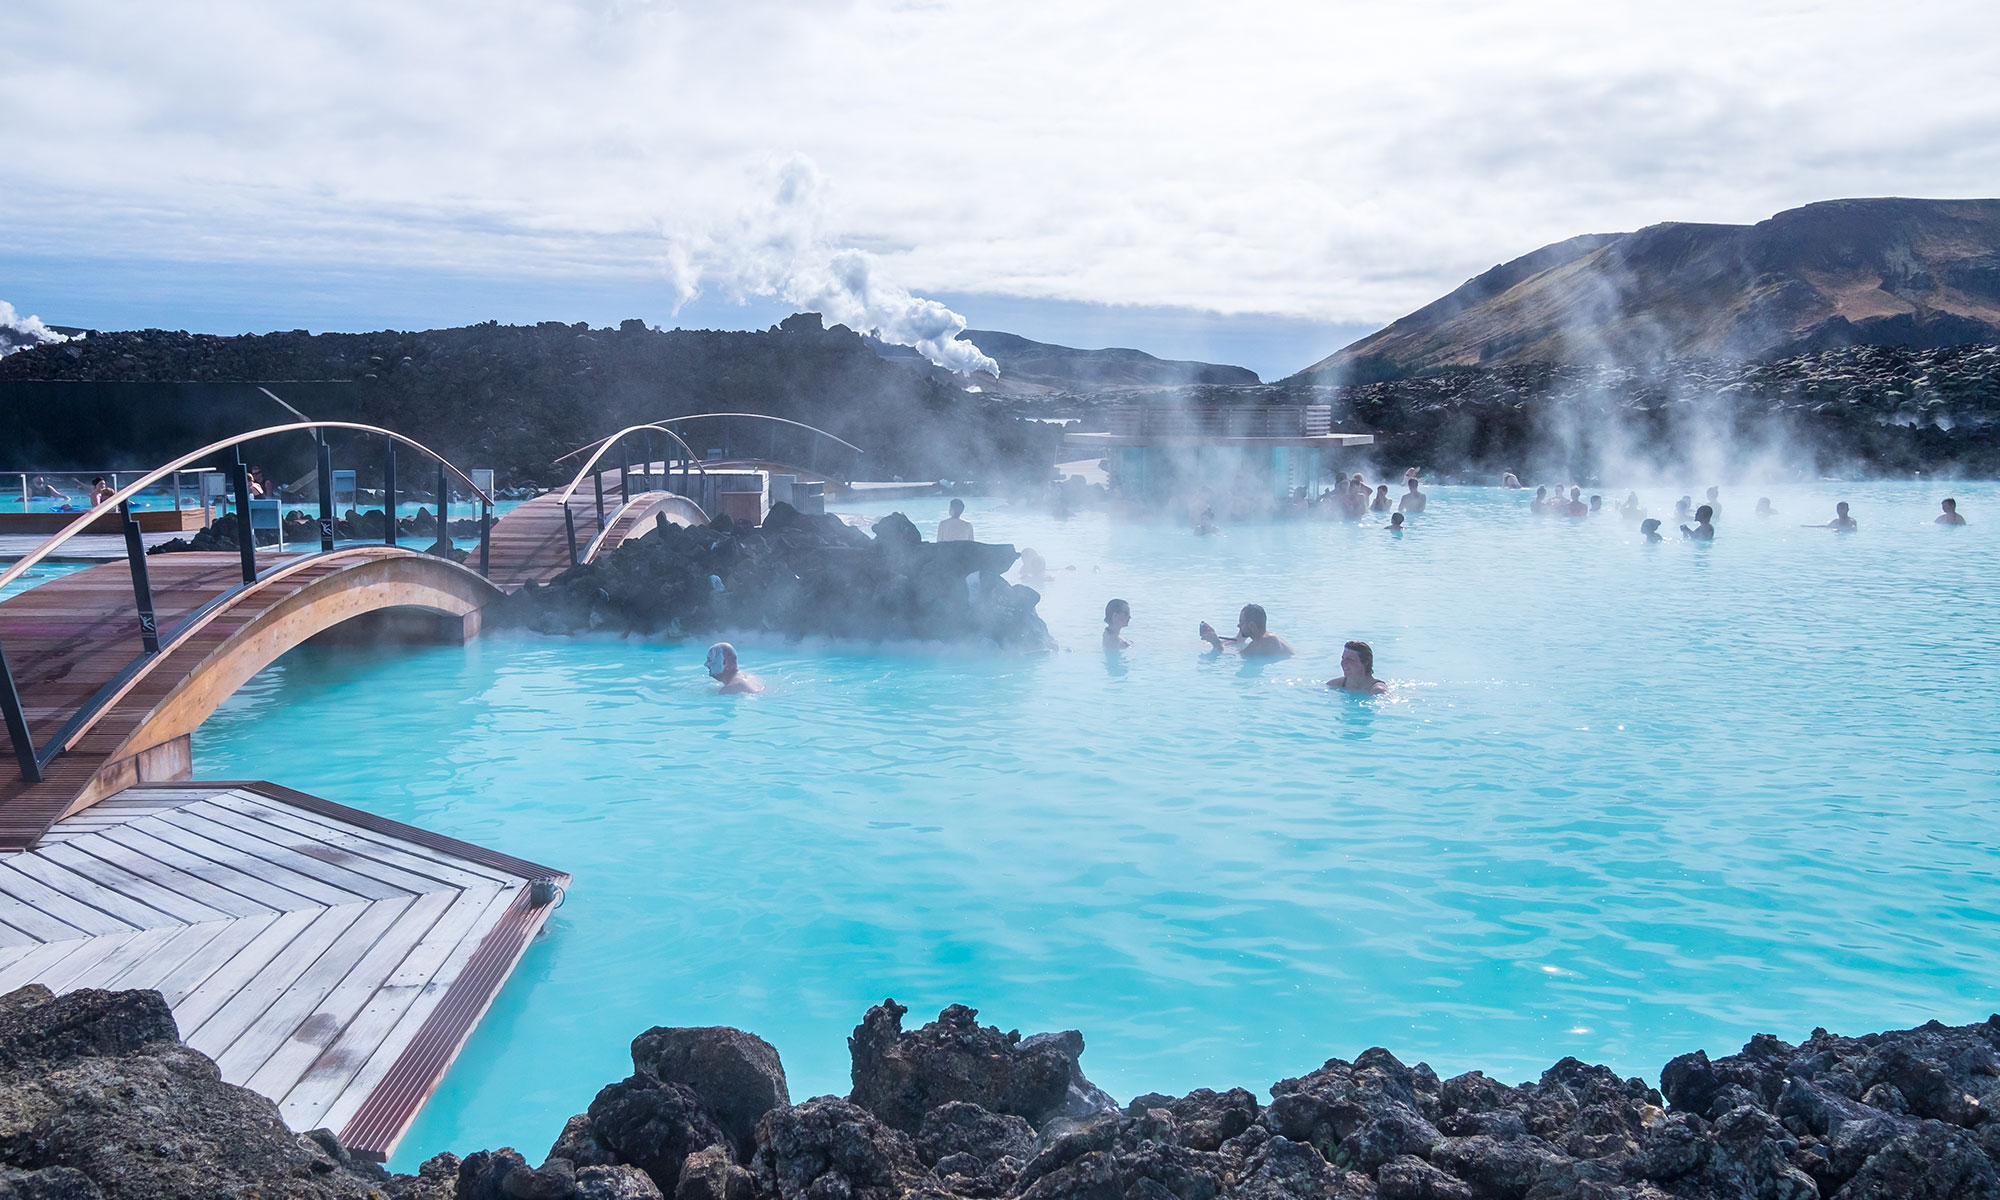 WOW Air Round-Trip From U.S Cities To Iceland Starting at $229